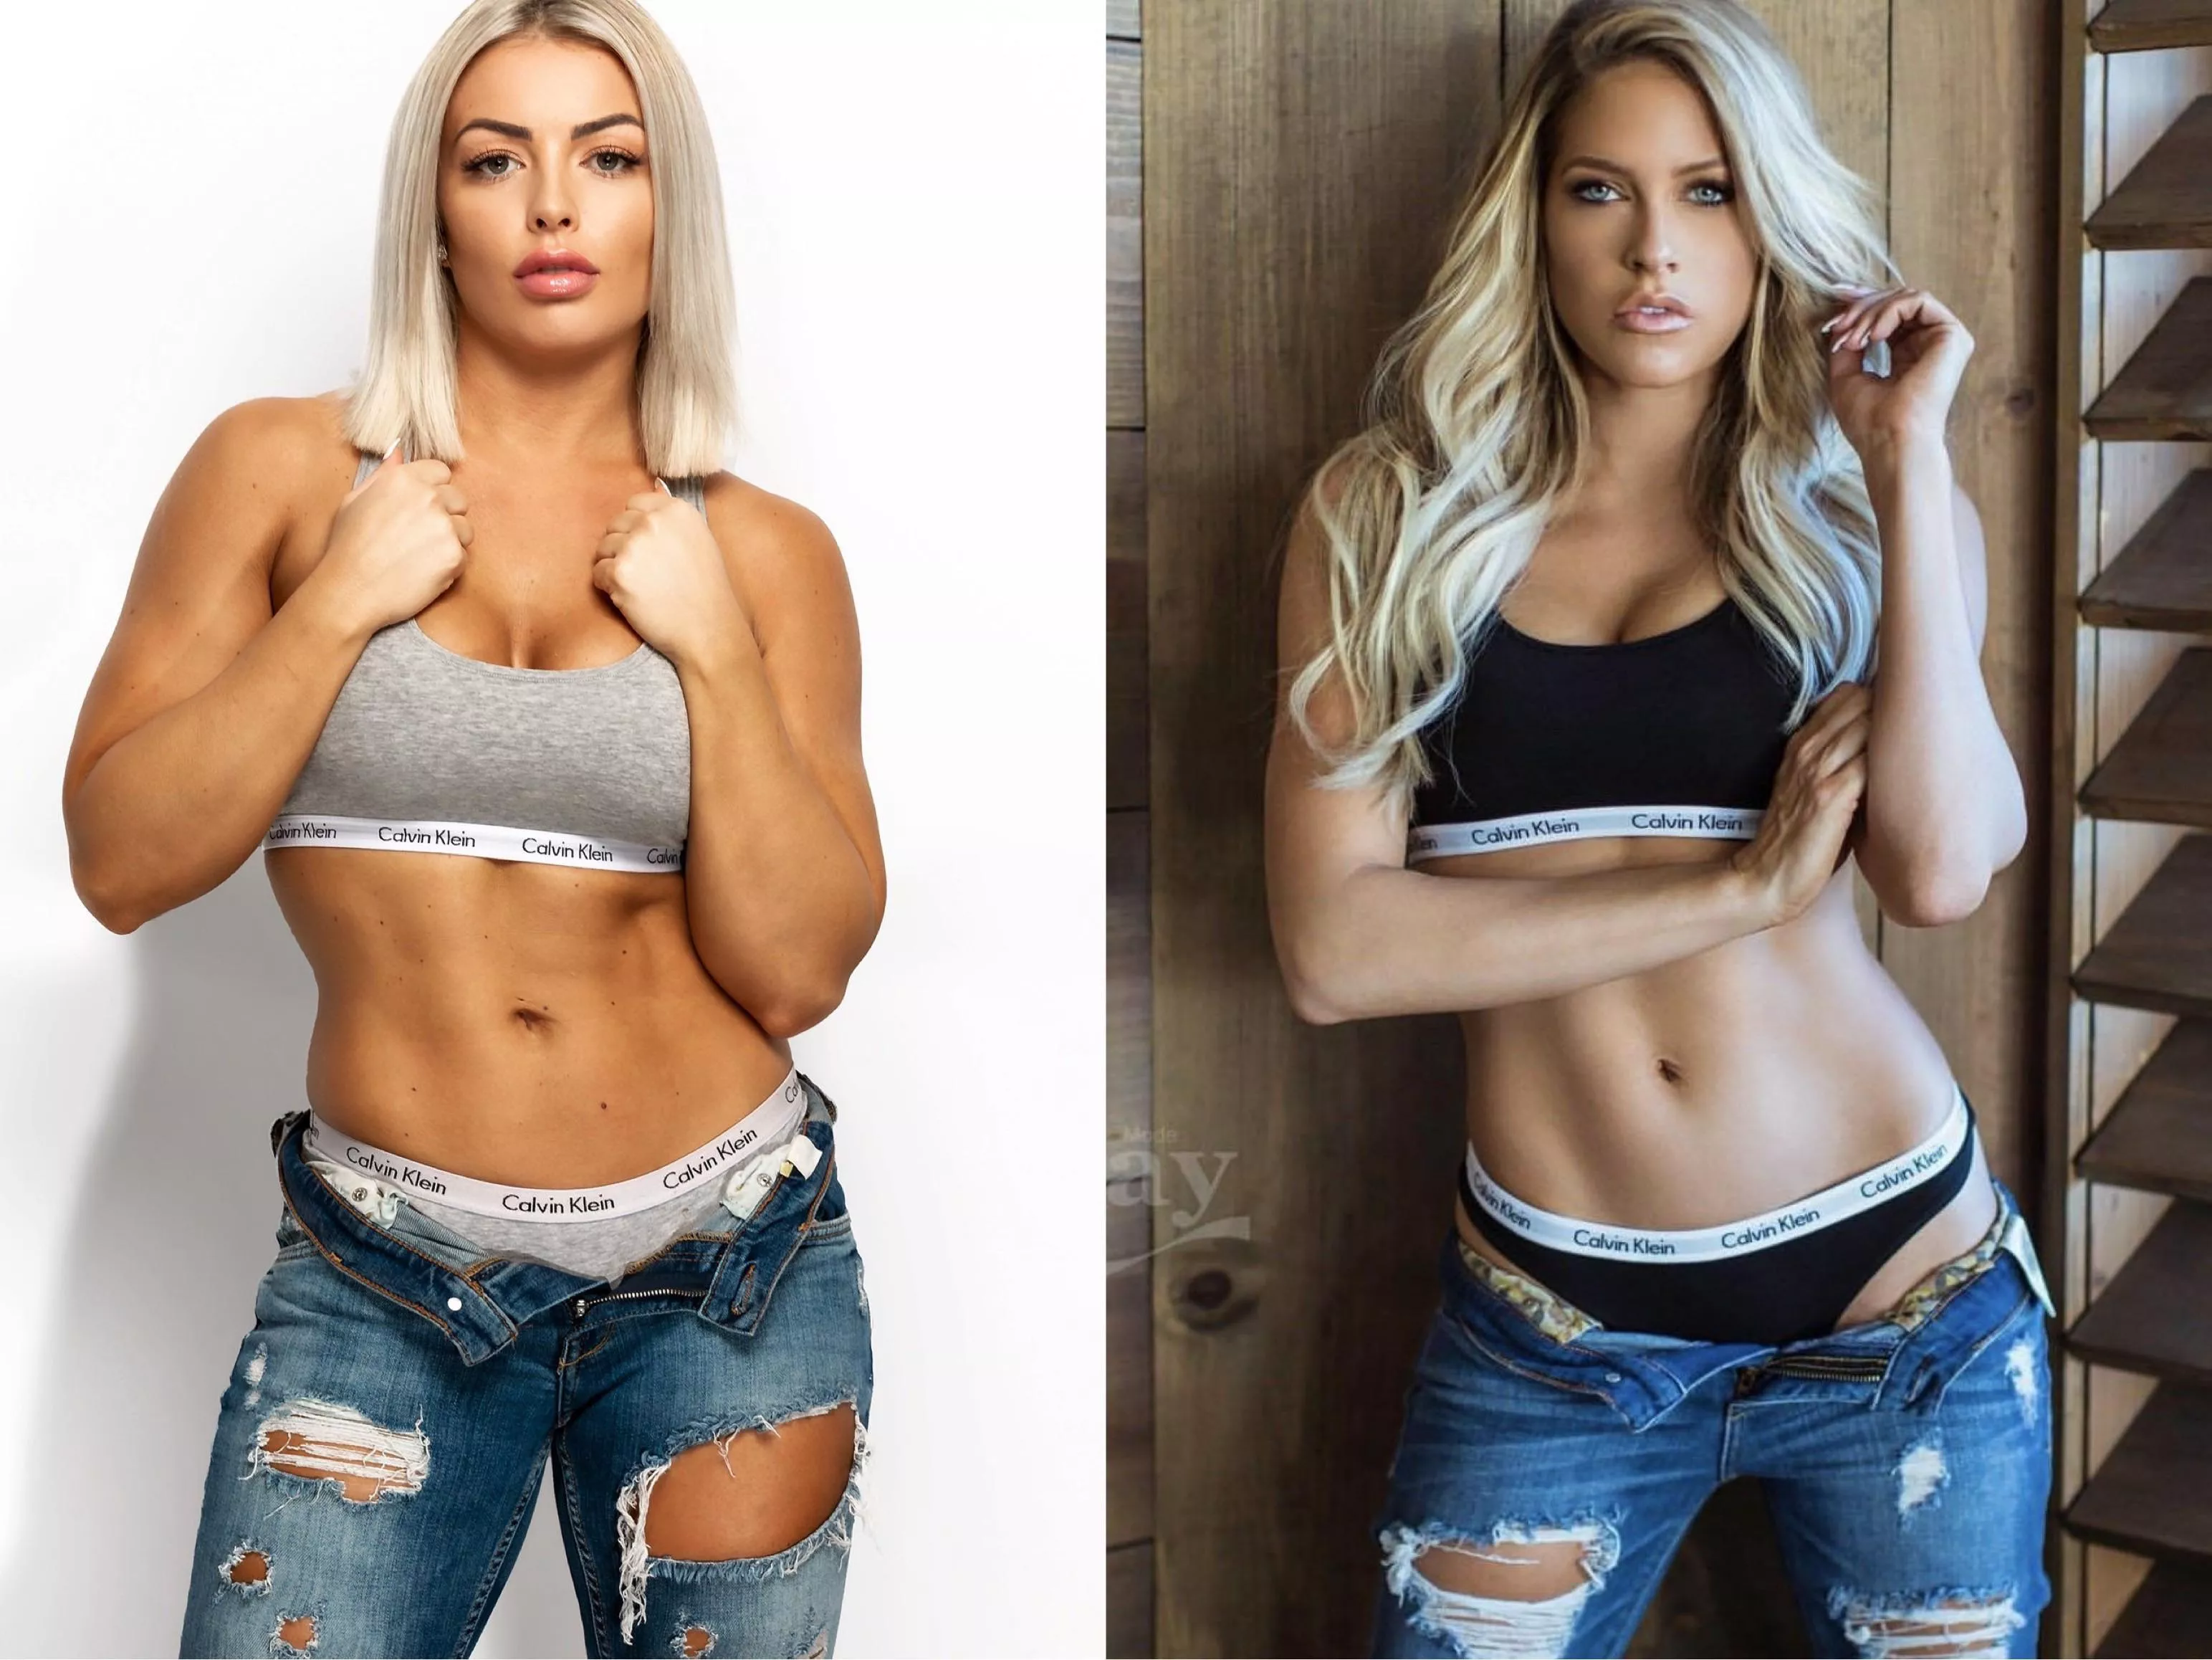 Who Rocked The Calvin Kleins W Ripped Jeans Look Better Mandy Rose Vs